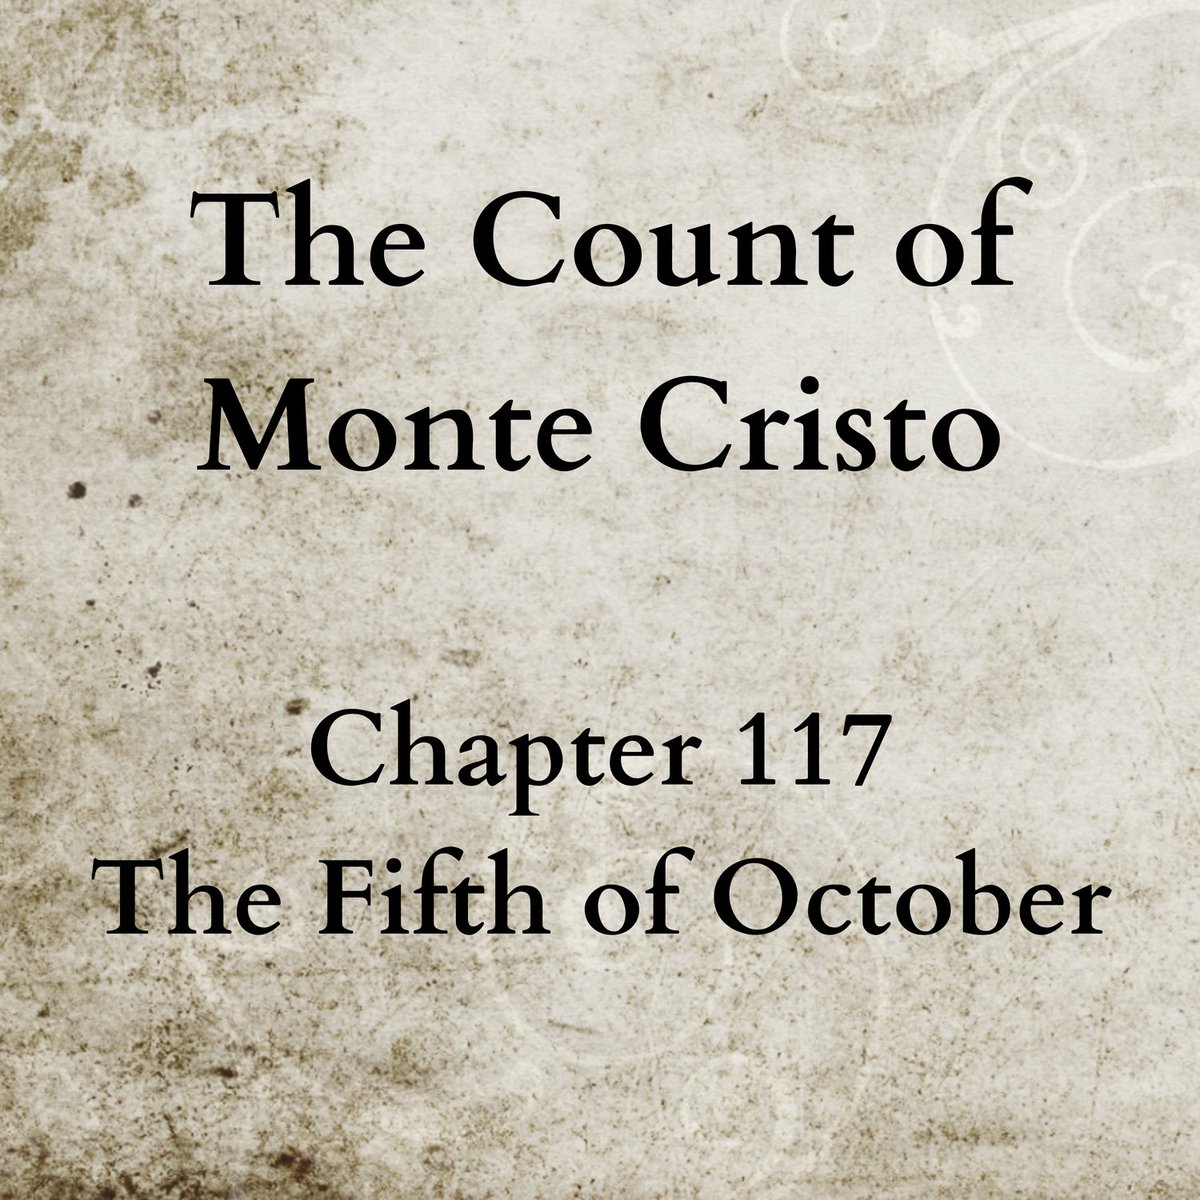 Maximillian and the Count realize their dreams in the last chapter of The Count of Monte Cristo.

Listen now!

podcasters.spotify.com/pod/show/owlab…
youtube.com/playlist?list=…

#dreams #love #hope #lianelittle #owlaboutstories #alexandredumas #thecountofmontecristo #classics  #books #novels